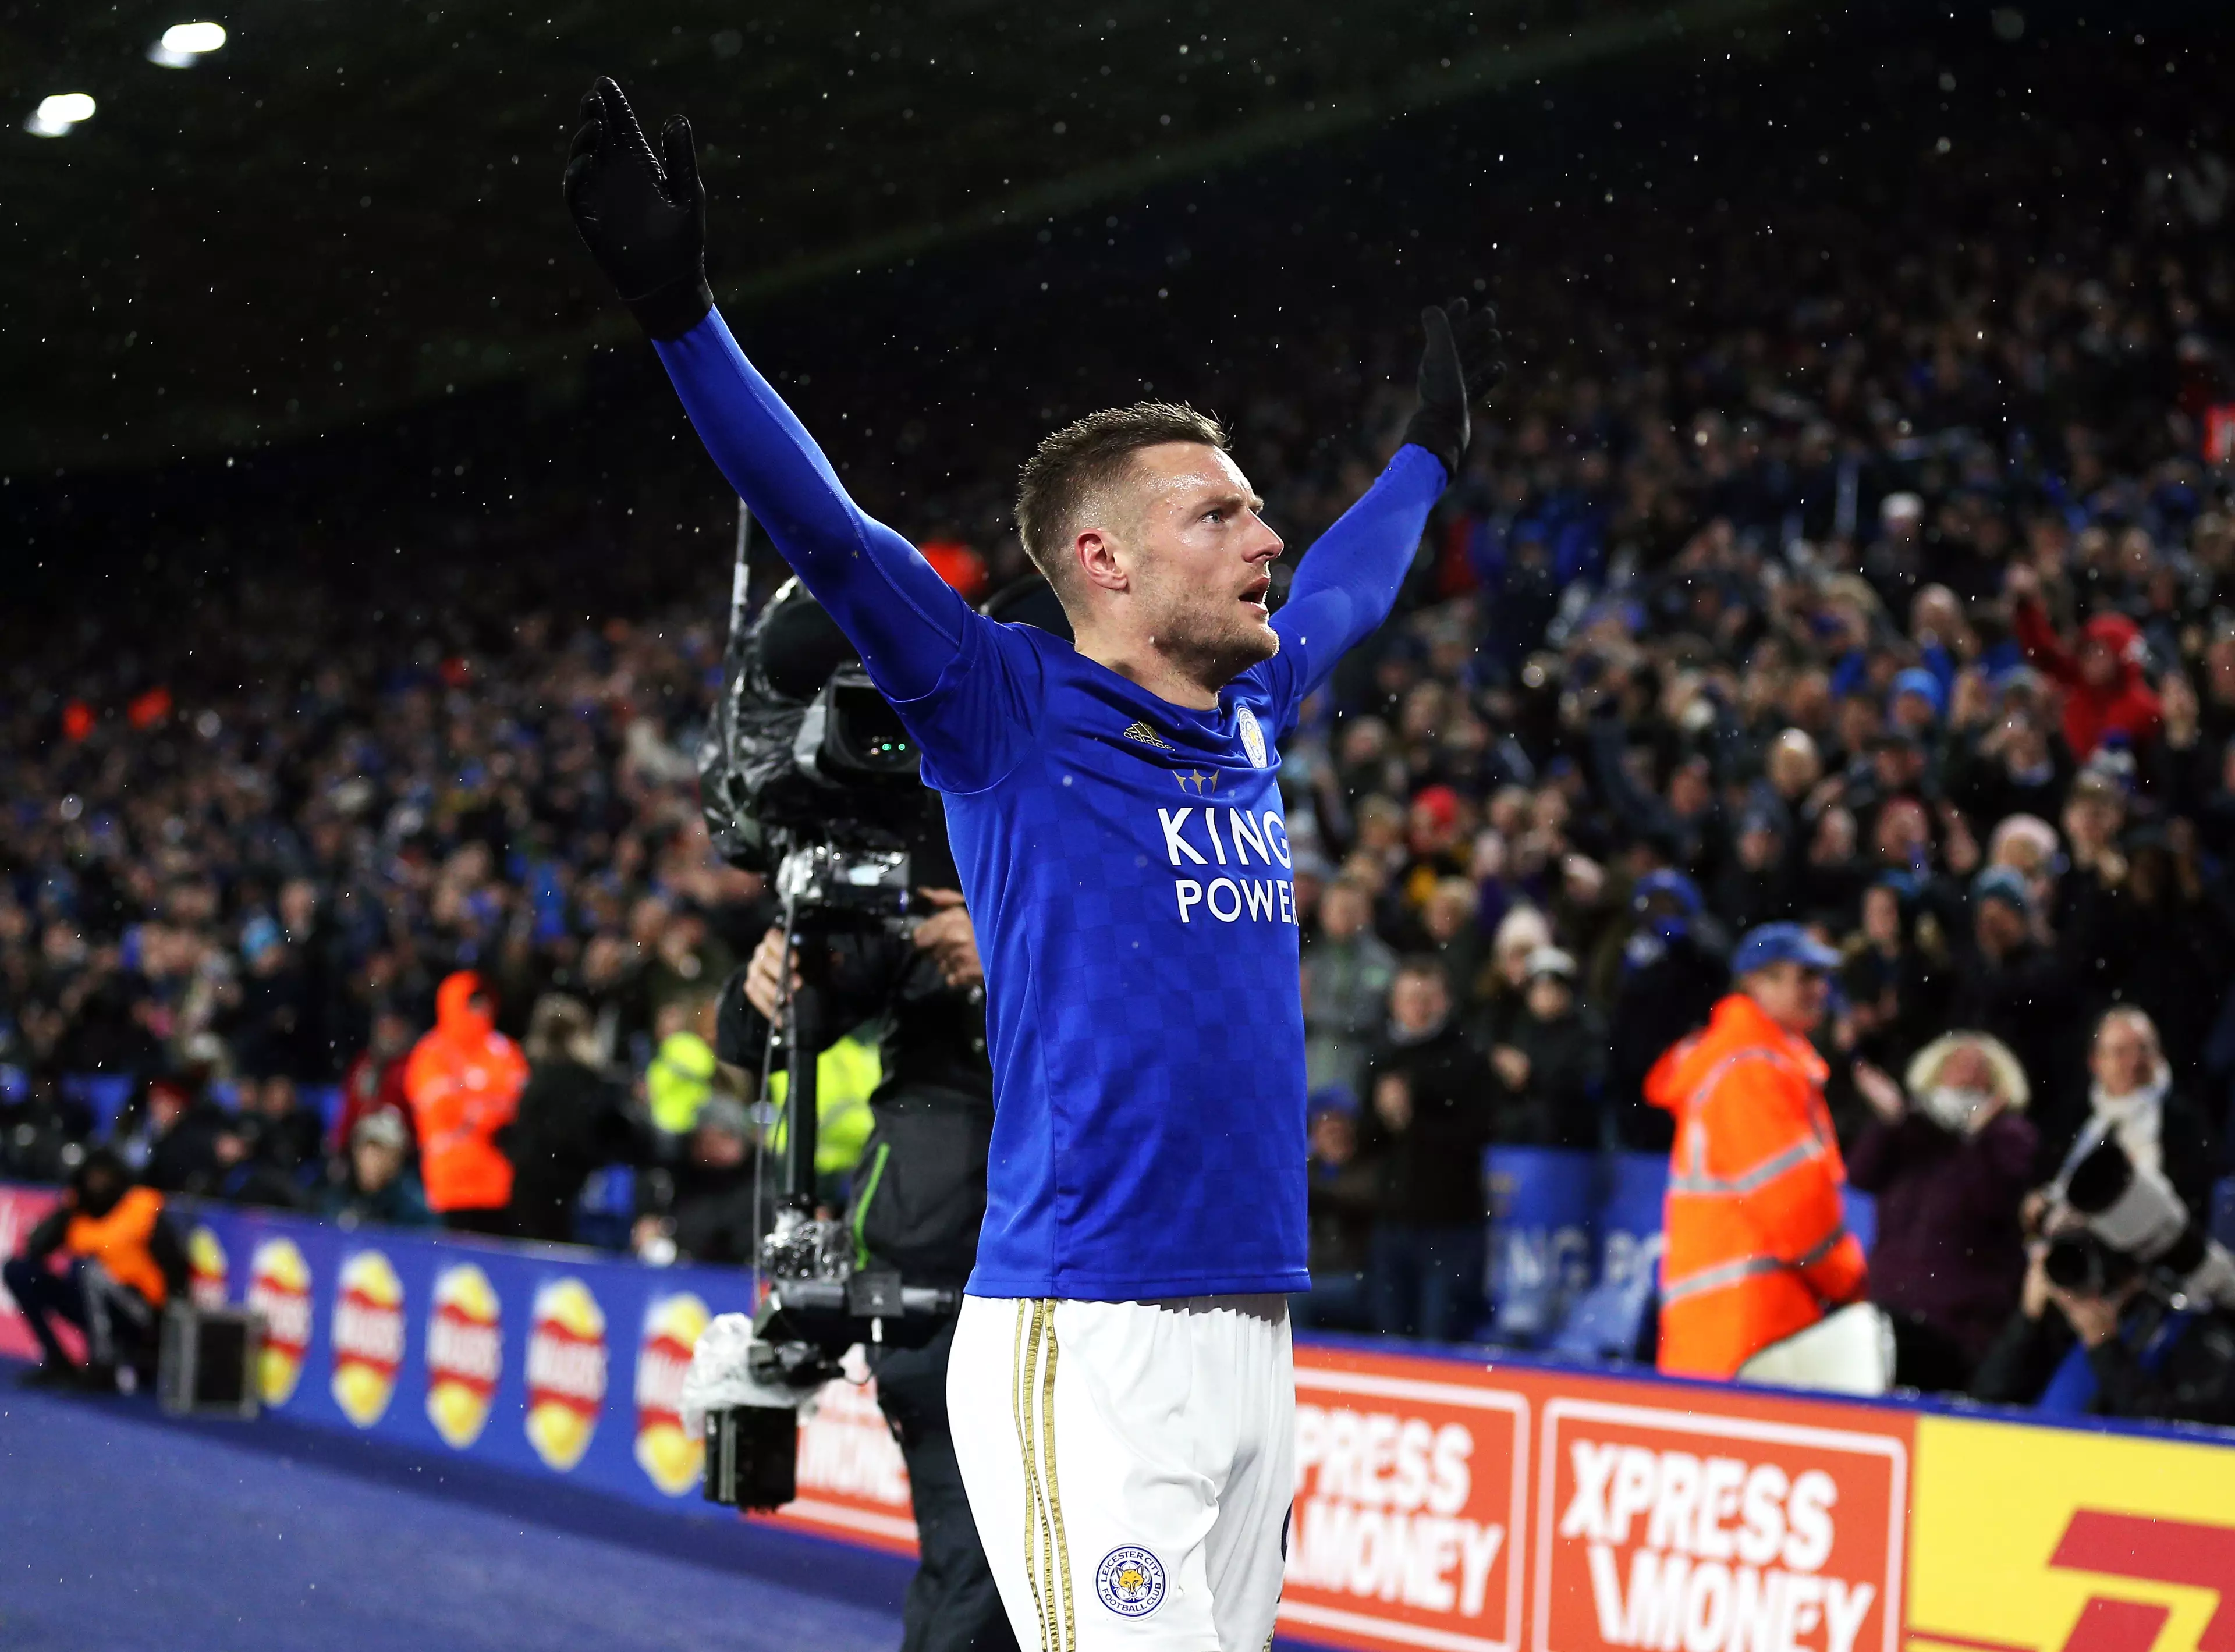 Jamie Vardy celebrates scoring in Leicester City's win vs Aston Villa, the last Premier League game to have a full stadium. Image: PA Images